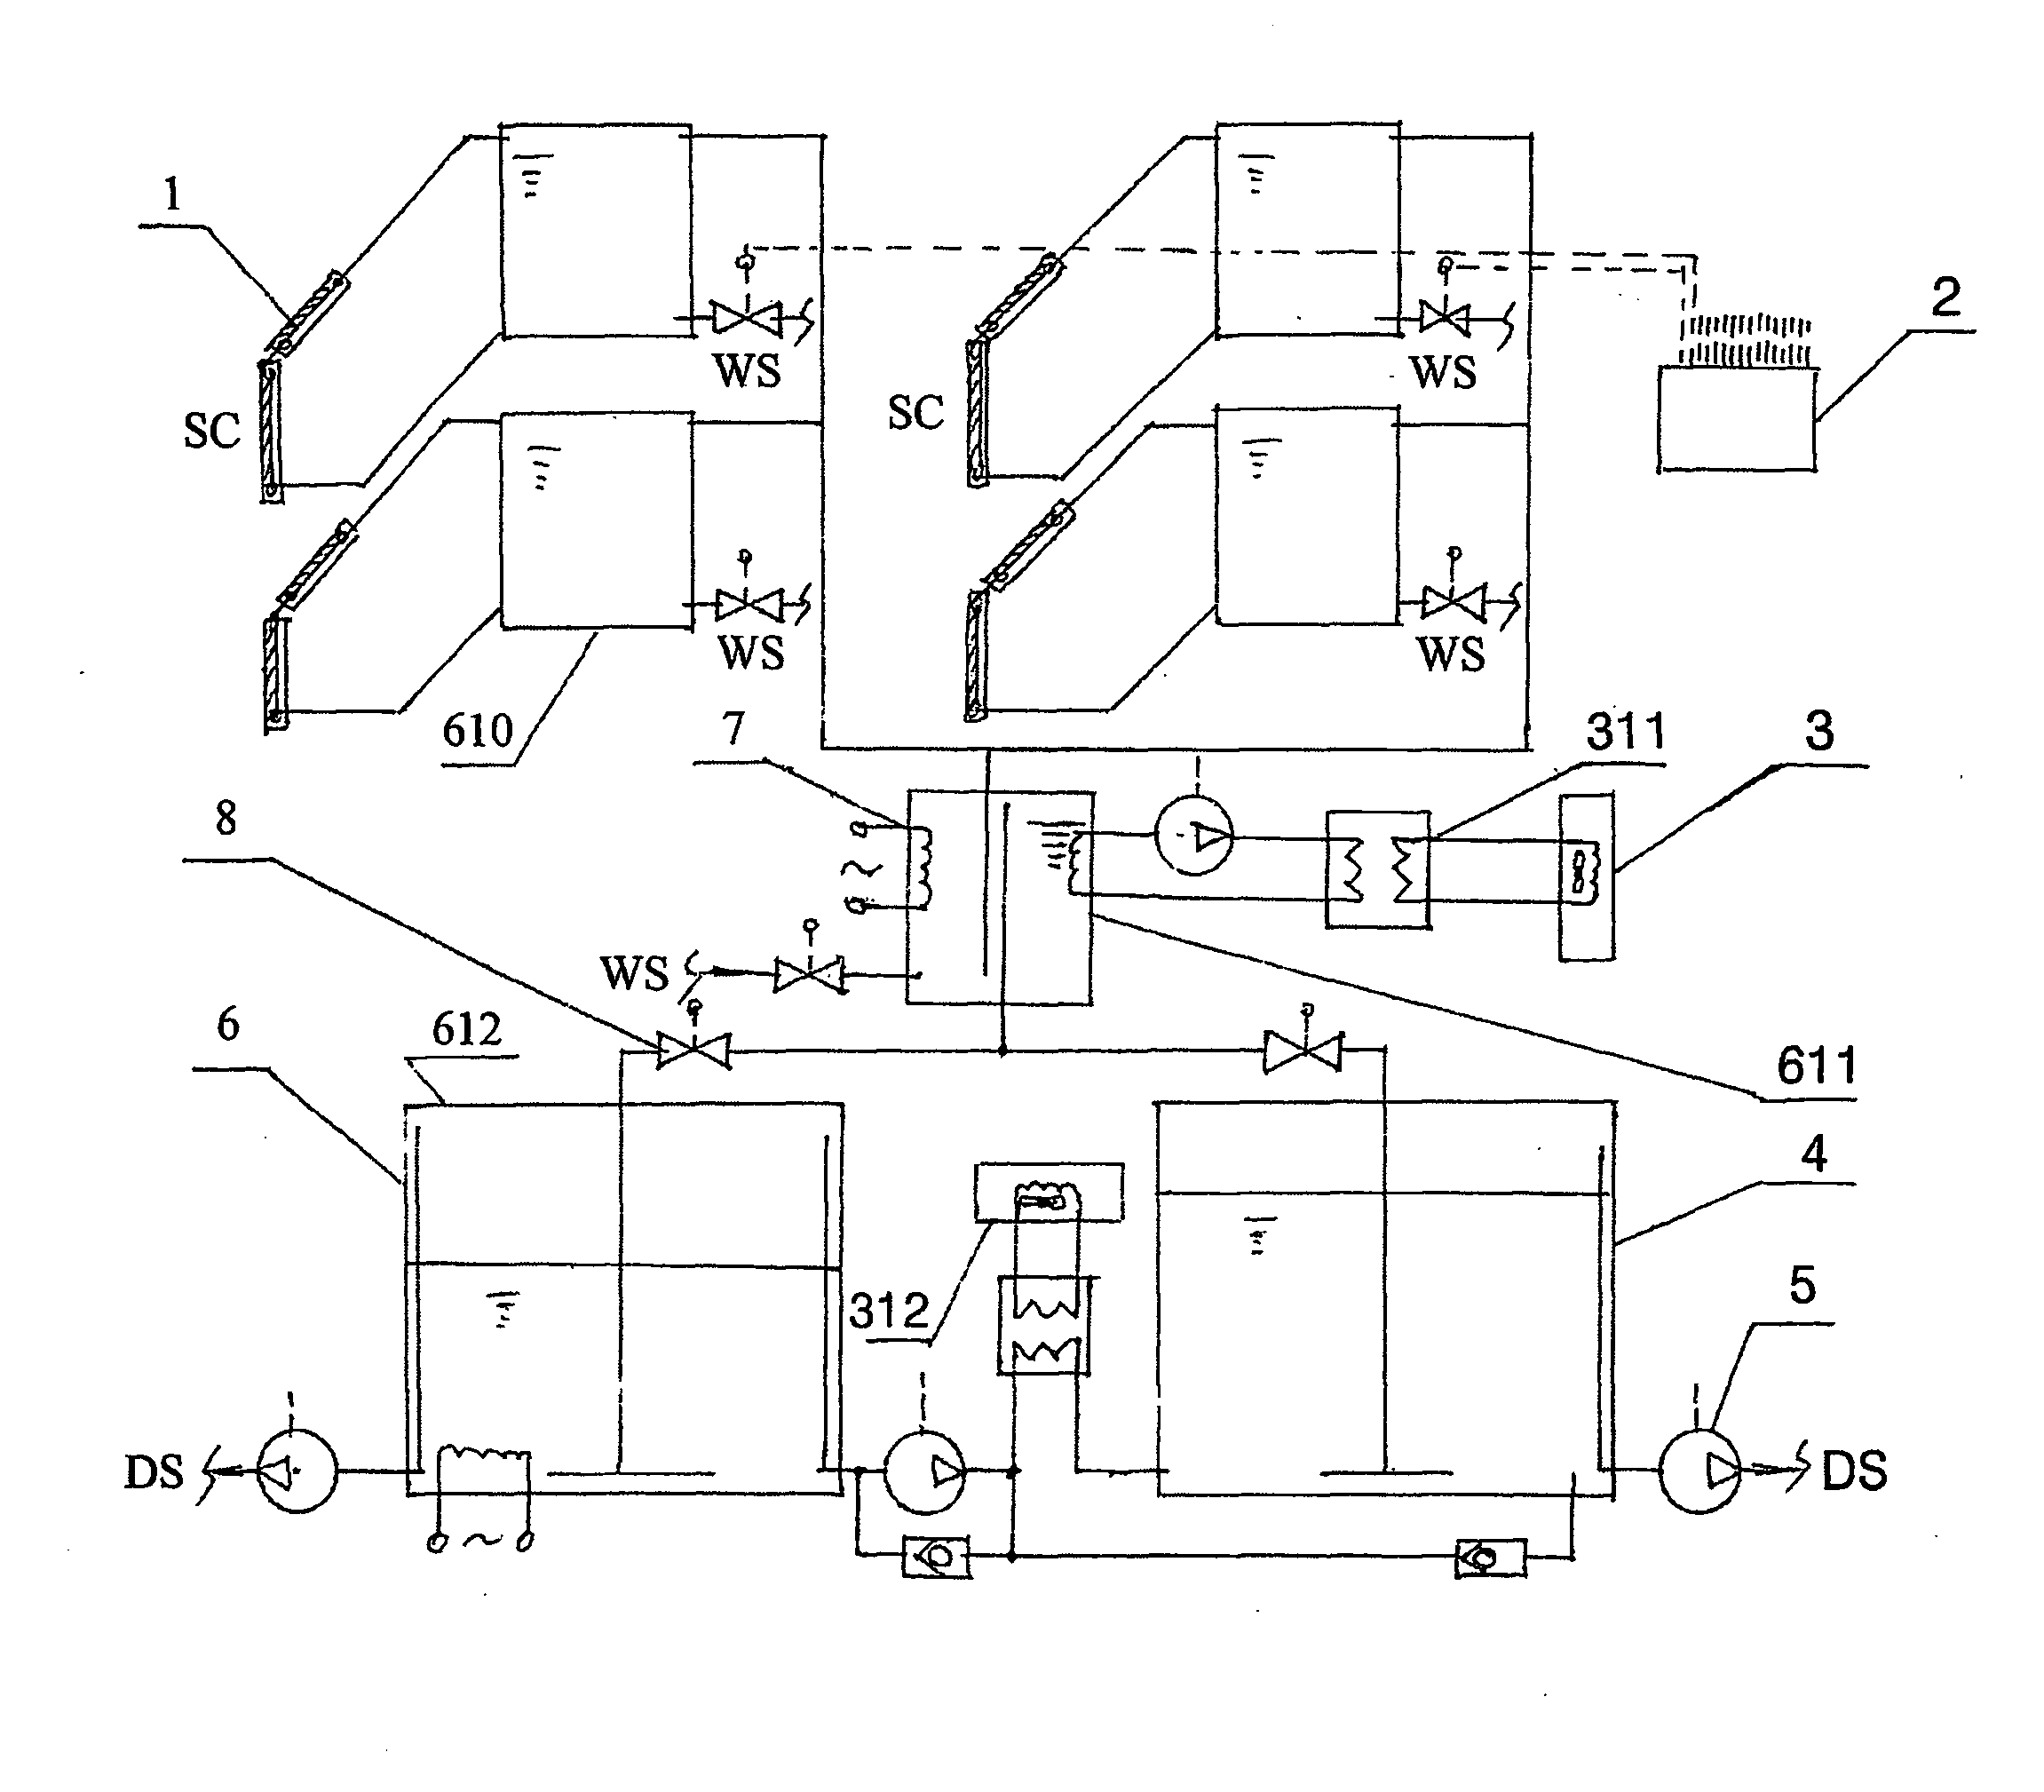 Method for Producing Hot Water Utilizing Combined Heat Resources of Solar Energy and Heat Pump in the Manner of Heating Water at Multilpe Stages and Accumulating Energy and a Device Especially for Carrying Out the Method